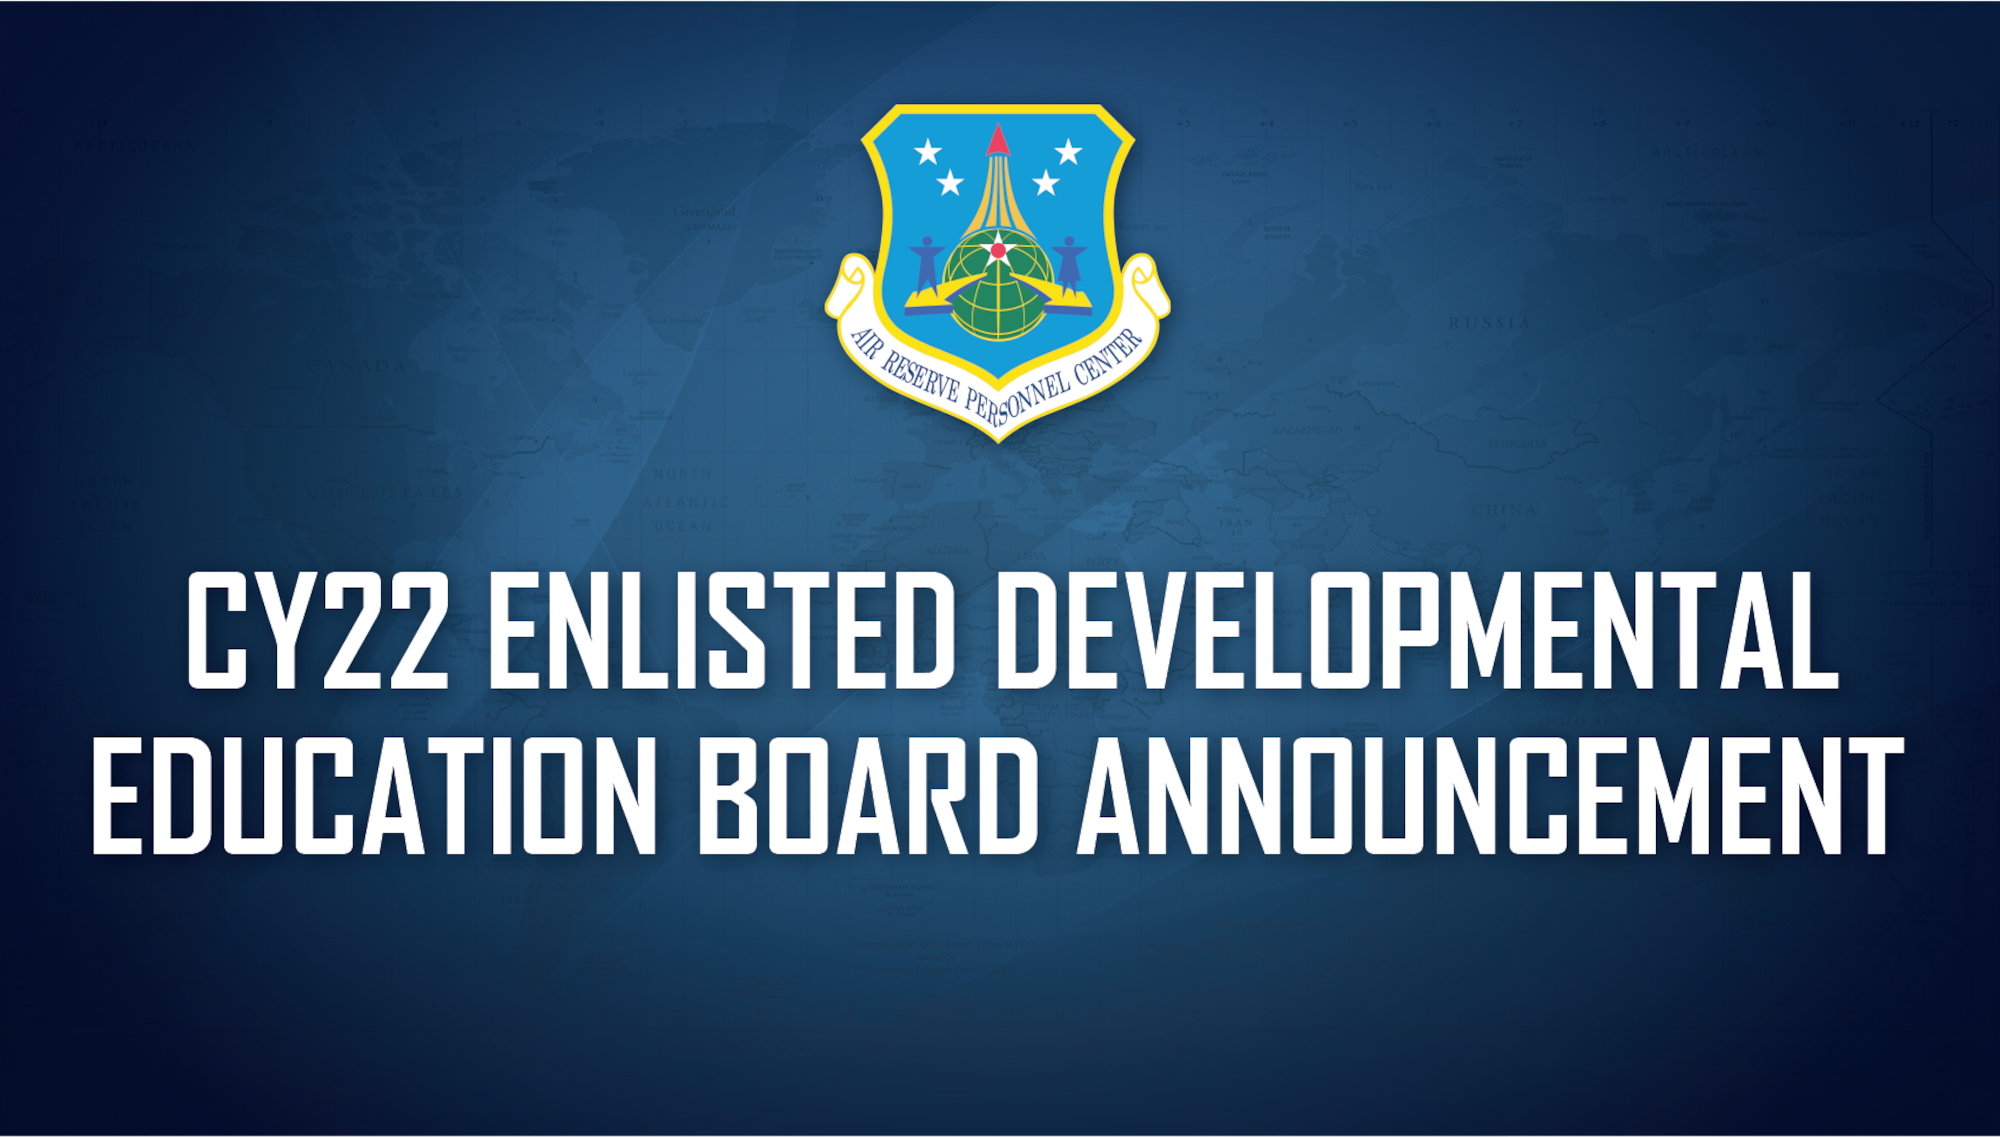 The application to apply is now open for the calendar year 2022 (CY22) Air Force Reserve Enlisted Developmental Education Board (EDEB), which will convene May 24-28, 2021, at the Headquarters Air Reserve Personnel Center, Buckley Air Force Base, Colorado.